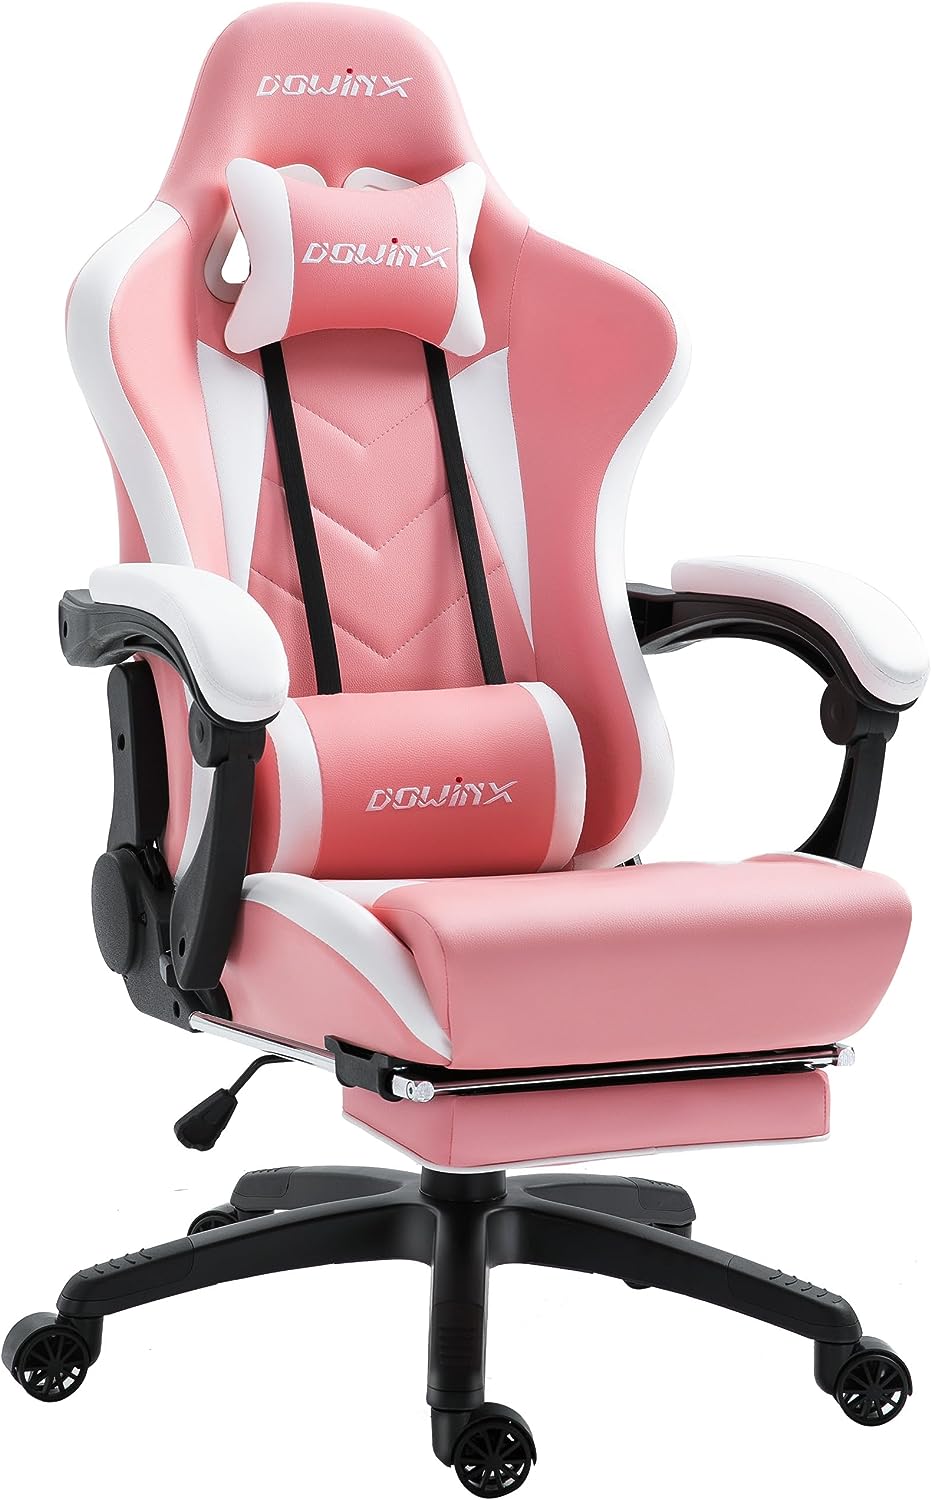 Dowinx 6688 Gaming Office Chair Ergonomic Racing Style-White&Pink 